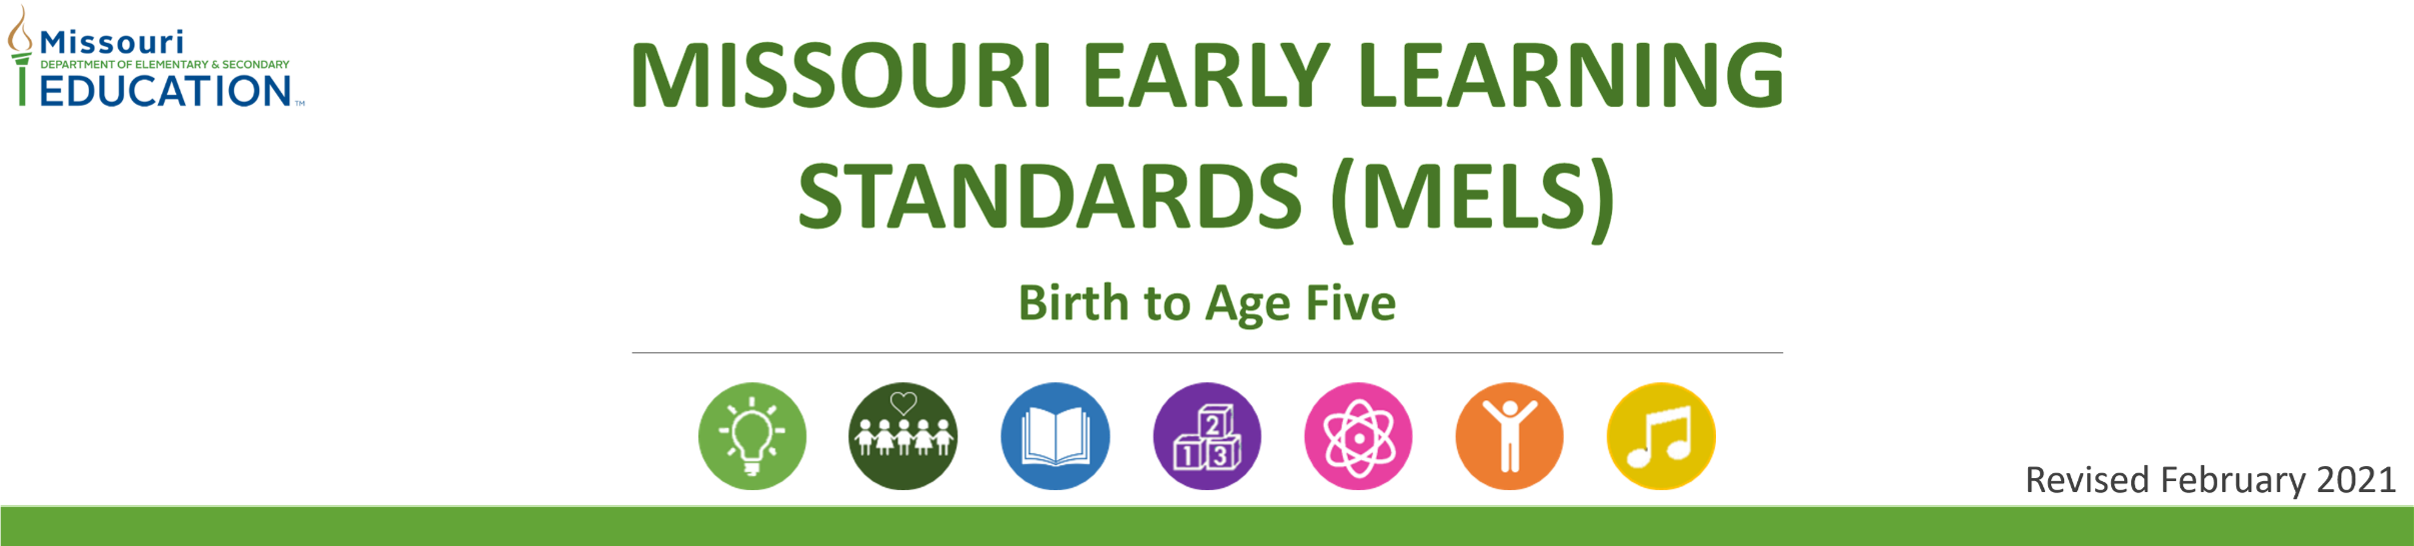 Missouri Early Learning Standards